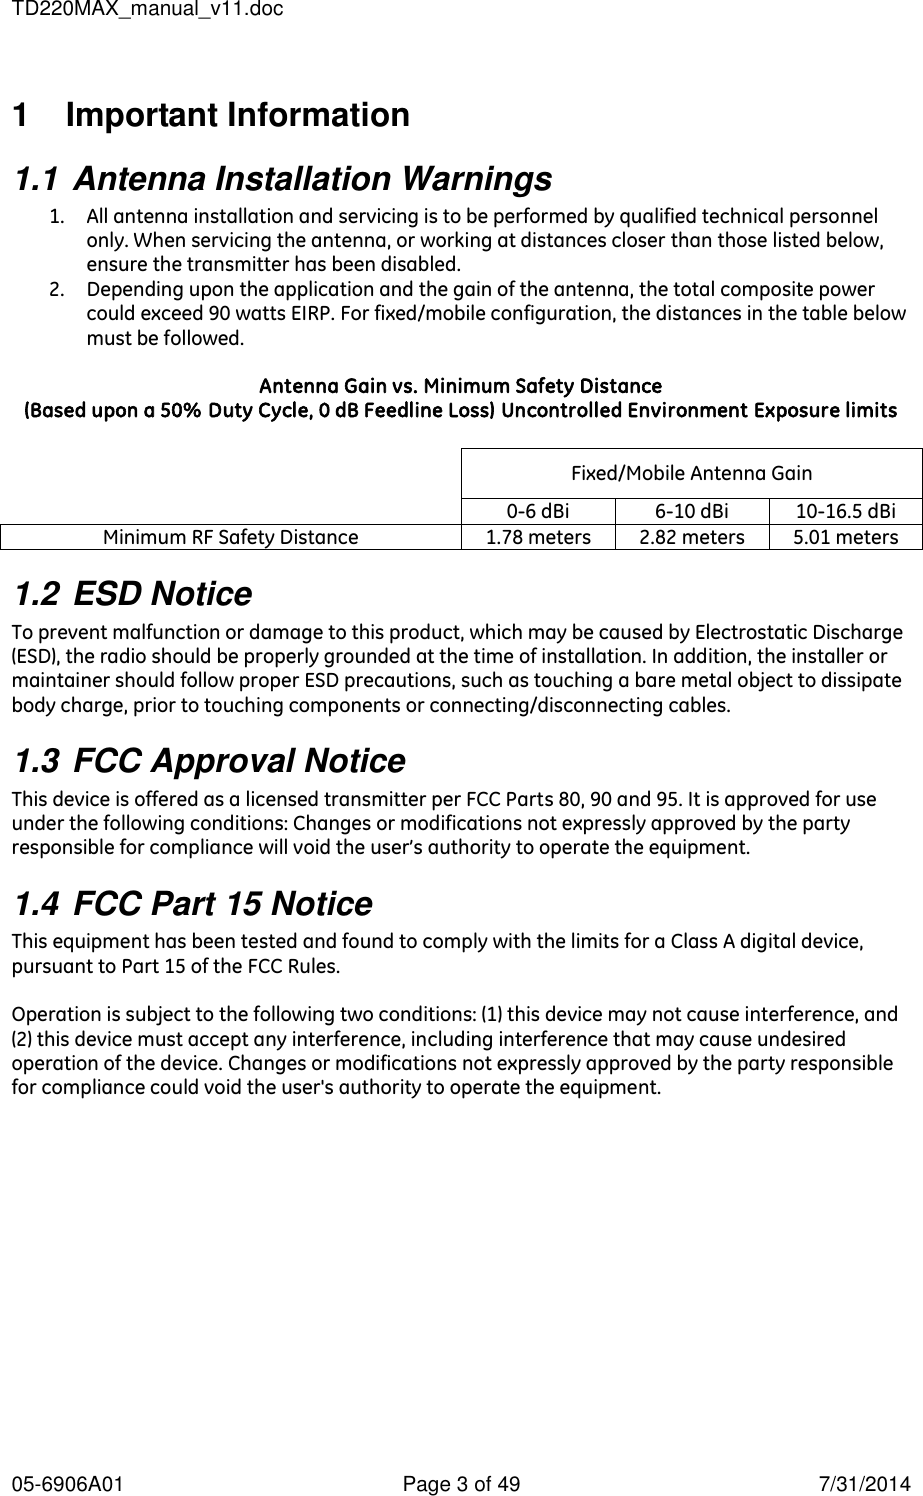 TD220MAX_manual_v11.doc 05-6906A01  Page 3 of 49  7/31/2014 1   Important Information 1.1 Antenna Installation Warnings 1. All antenna installation and servicing is to be performed by qualified technical personnel only. When servicing the antenna, or working at distances closer than those listed below, ensure the transmitter has been disabled. 2. Depending upon the application and the gain of the antenna, the total composite power could exceed 90 watts EIRP. For fixed/mobile configuration, the distances in the table below must be followed.  Antenna Gain vs. Minimum Safety Distance (Based upon a 50% Duty Cycle, 0 dB Feedline Loss) Uncontrolled Environment Exposure limits   Fixed/Mobile Antenna Gain   0-6 dBi 6-10 dBi 10-16.5 dBi Minimum RF Safety Distance 1.78 meters 2.82 meters 5.01 meters 1.2 ESD Notice To prevent malfunction or damage to this product, which may be caused by Electrostatic Discharge (ESD), the radio should be properly grounded at the time of installation. In addition, the installer or maintainer should follow proper ESD precautions, such as touching a bare metal object to dissipate body charge, prior to touching components or connecting/disconnecting cables. 1.3 FCC Approval Notice  This device is offered as a licensed transmitter per FCC Parts 80, 90 and 95. It is approved for use under the following conditions: Changes or modifications not expressly approved by the party responsible for compliance will void the user’s authority to operate the equipment. 1.4 FCC Part 15 Notice  This equipment has been tested and found to comply with the limits for a Class A digital device, pursuant to Part 15 of the FCC Rules.  Operation is subject to the following two conditions: (1) this device may not cause interference, and (2) this device must accept any interference, including interference that may cause undesired operation of the device. Changes or modifications not expressly approved by the party responsible for compliance could void the user&apos;s authority to operate the equipment. 